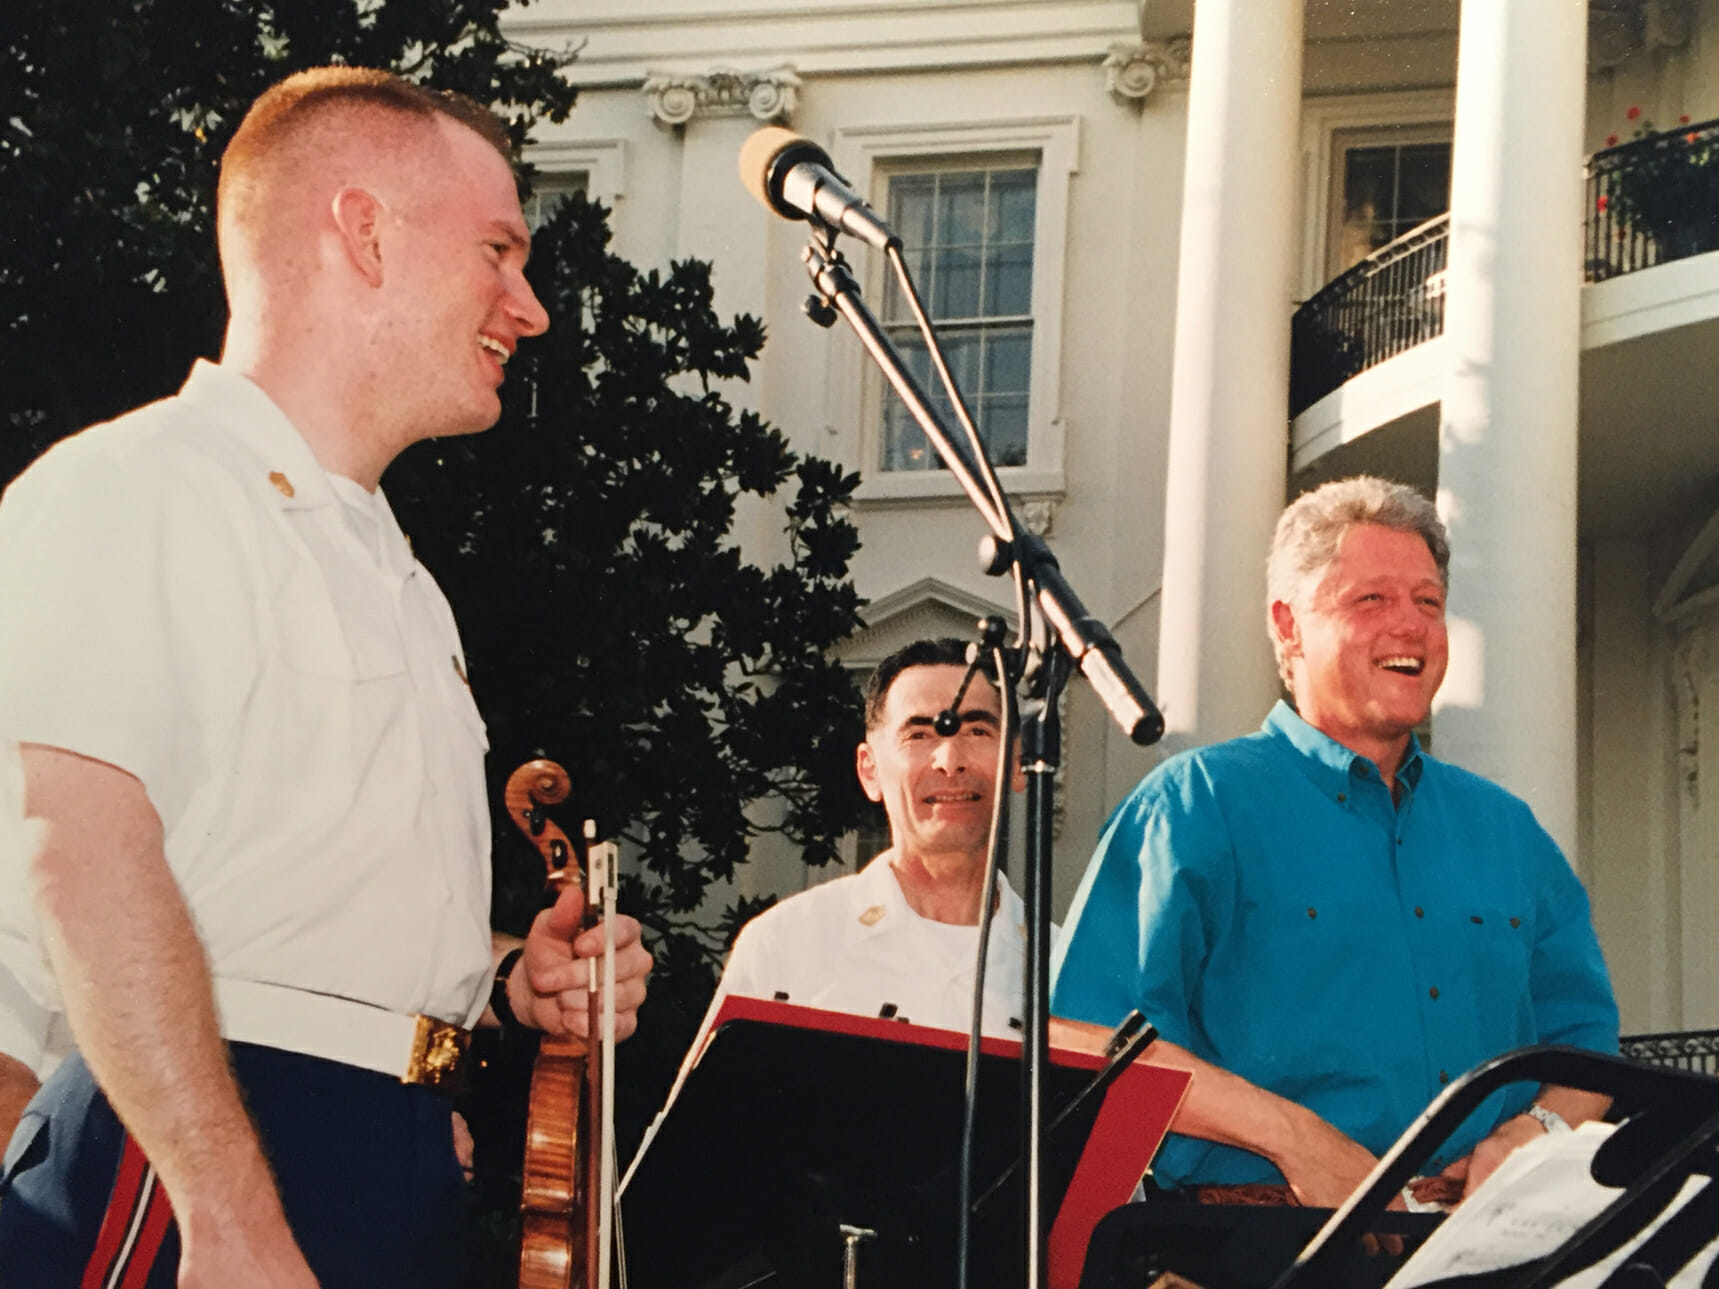 Peter Wilson with President Bill Clinton at the White House